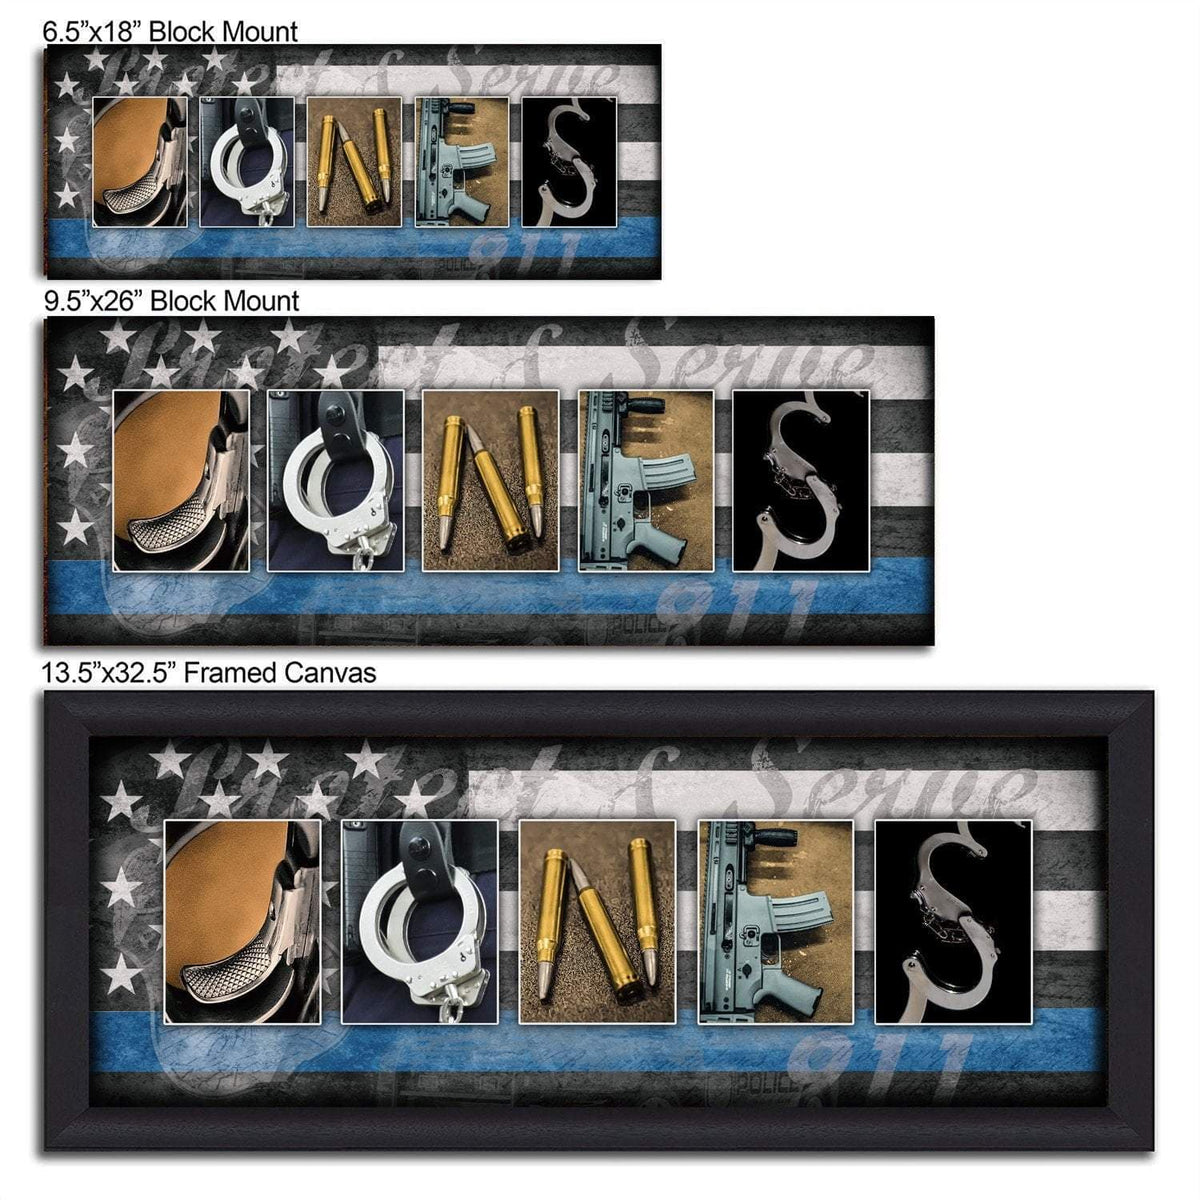 Customized Name thin blue line print using images of SWAT team equipment to spell your name - Size Options